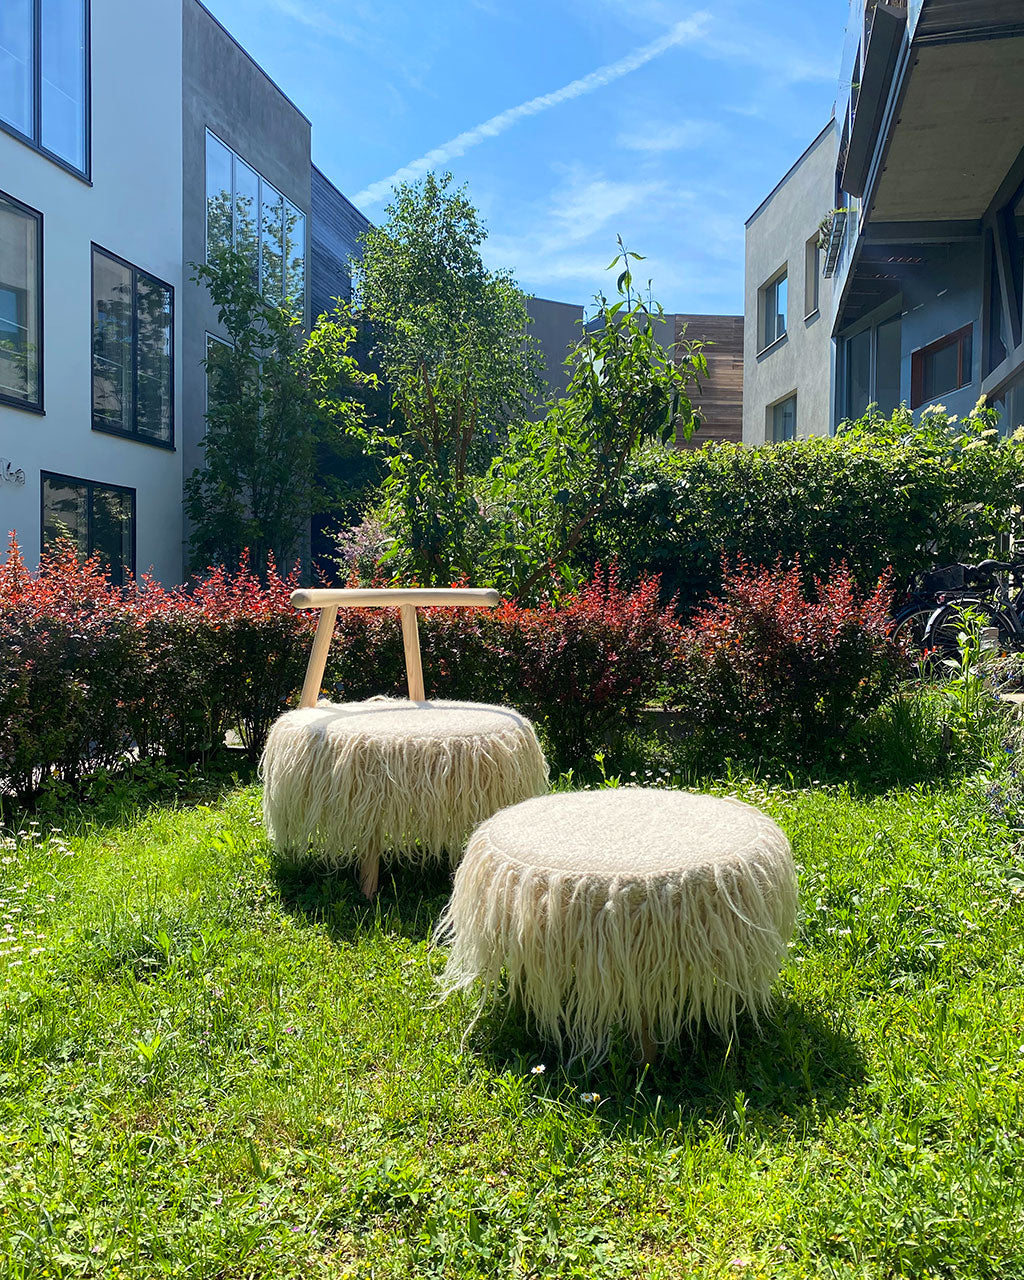 Sheep wool Armchair and pouf from the Ukraine